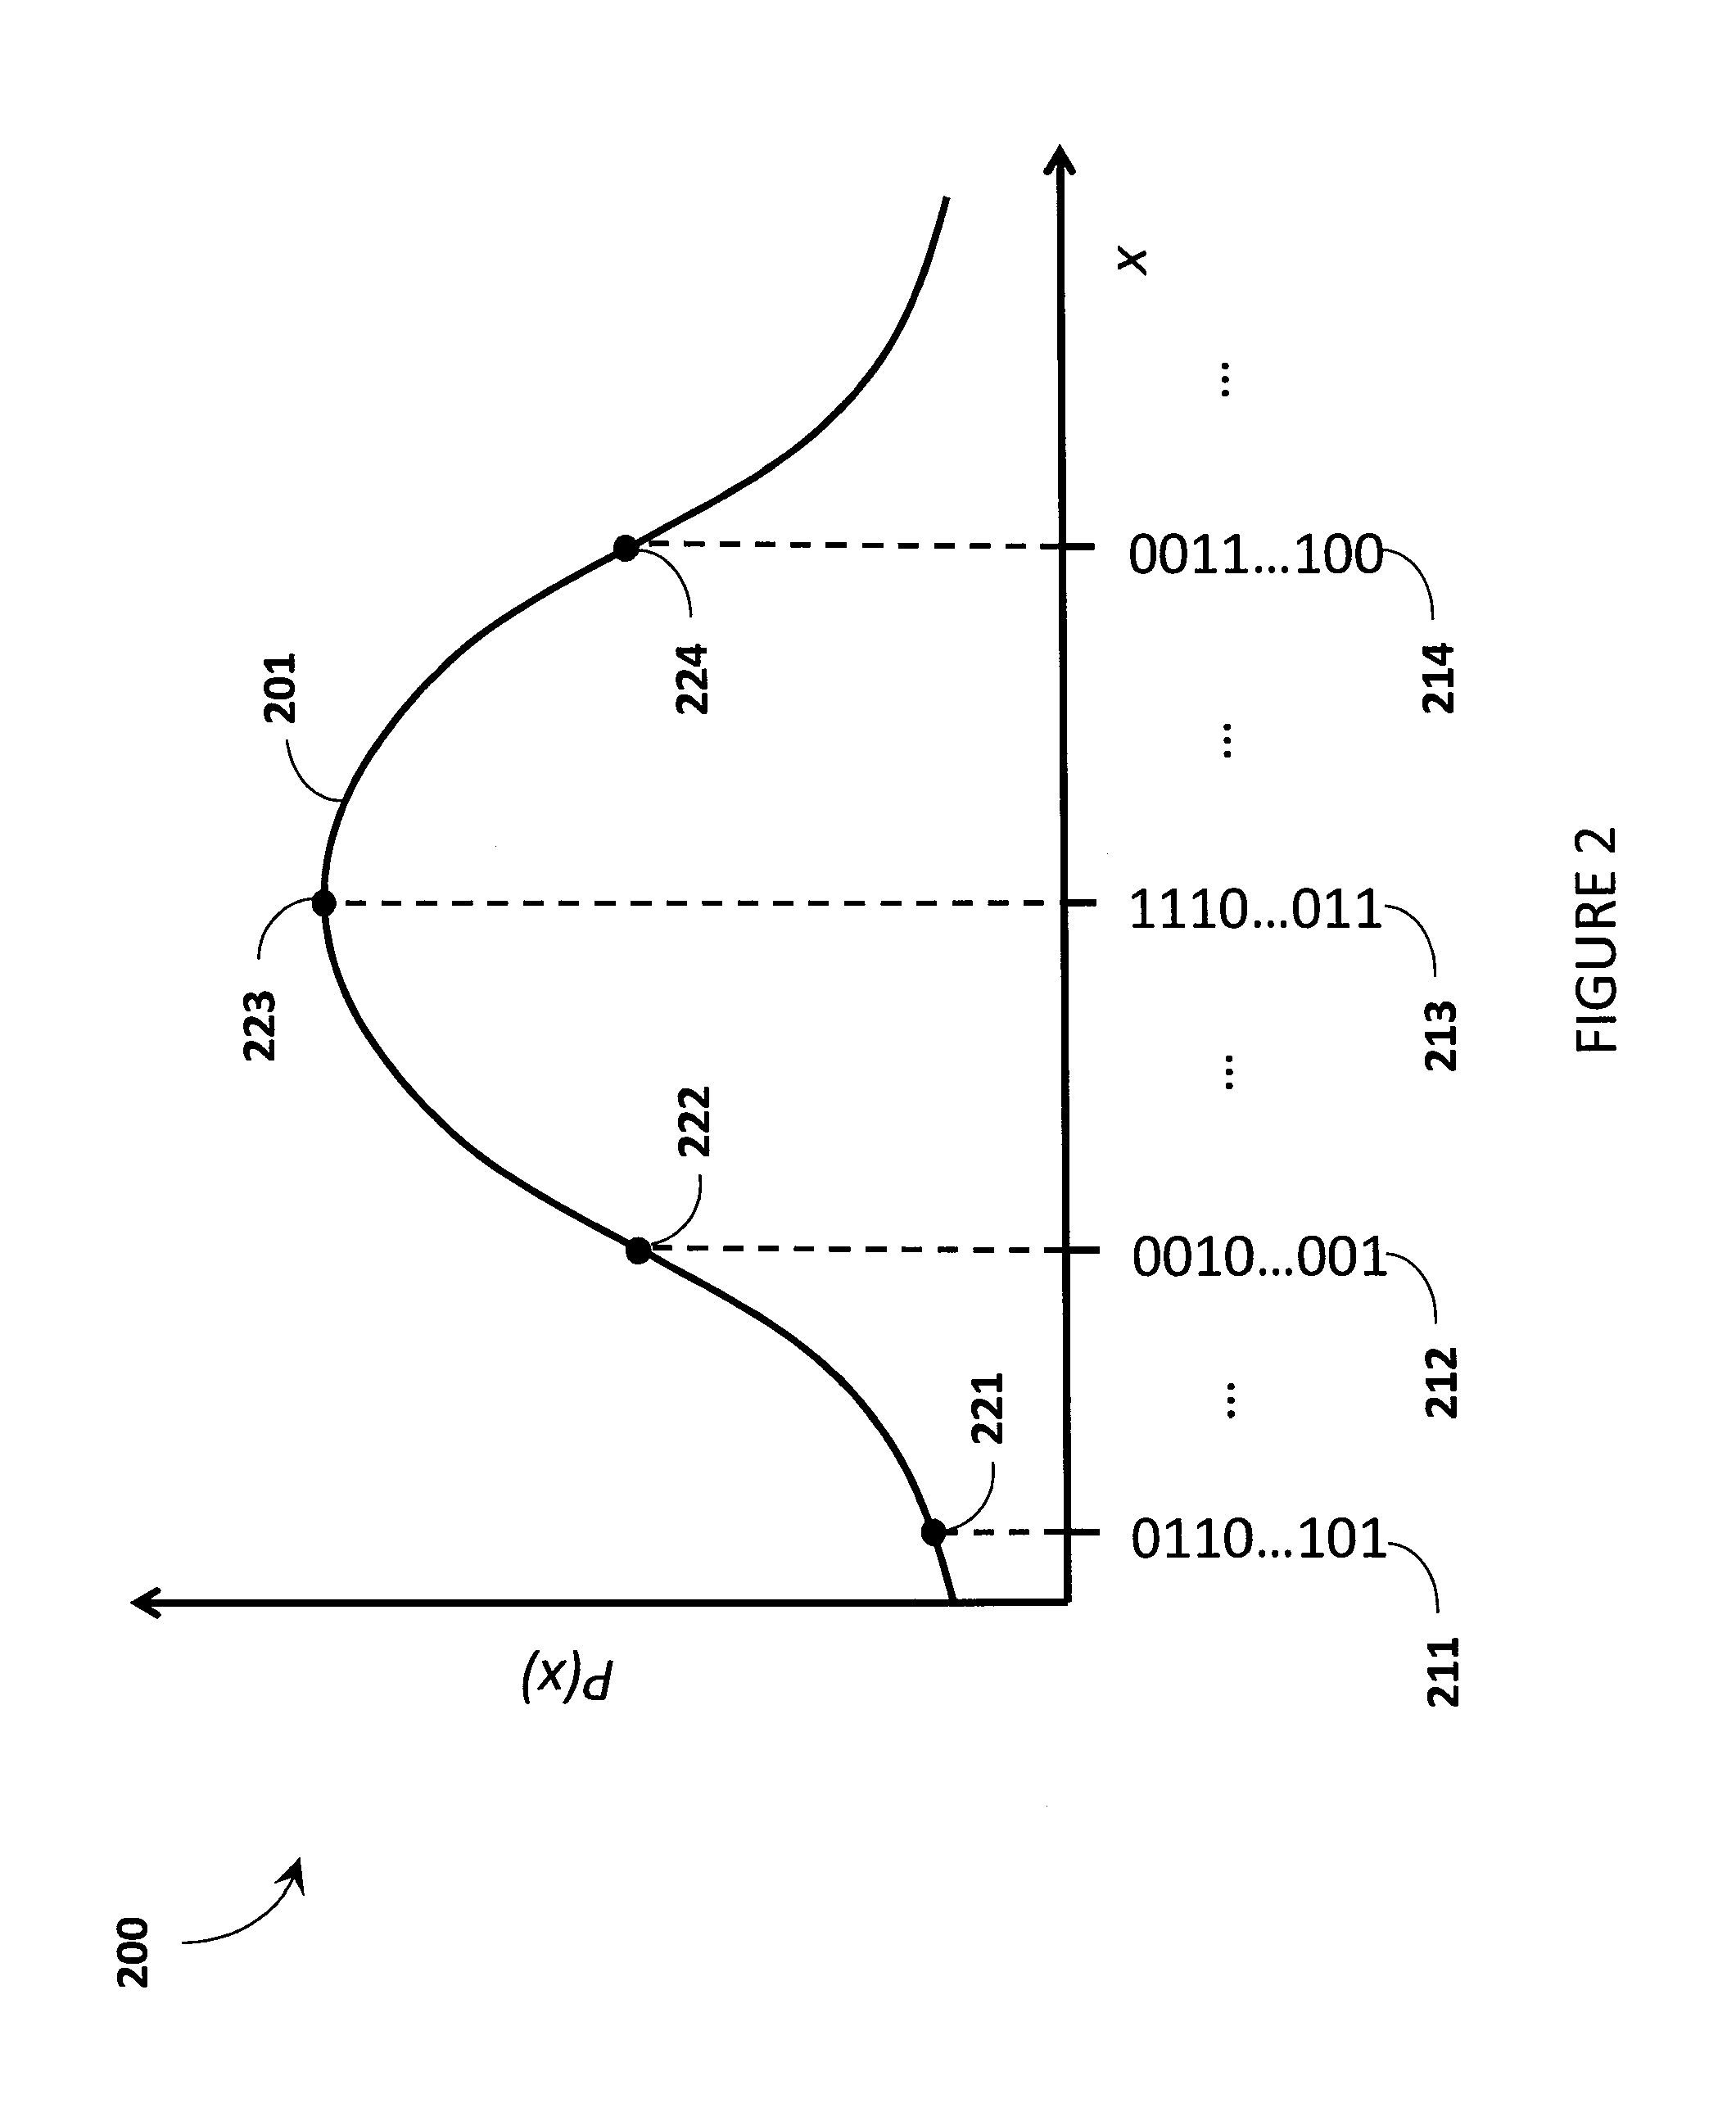 Quantum processor based systems and methods that minimize an objective function